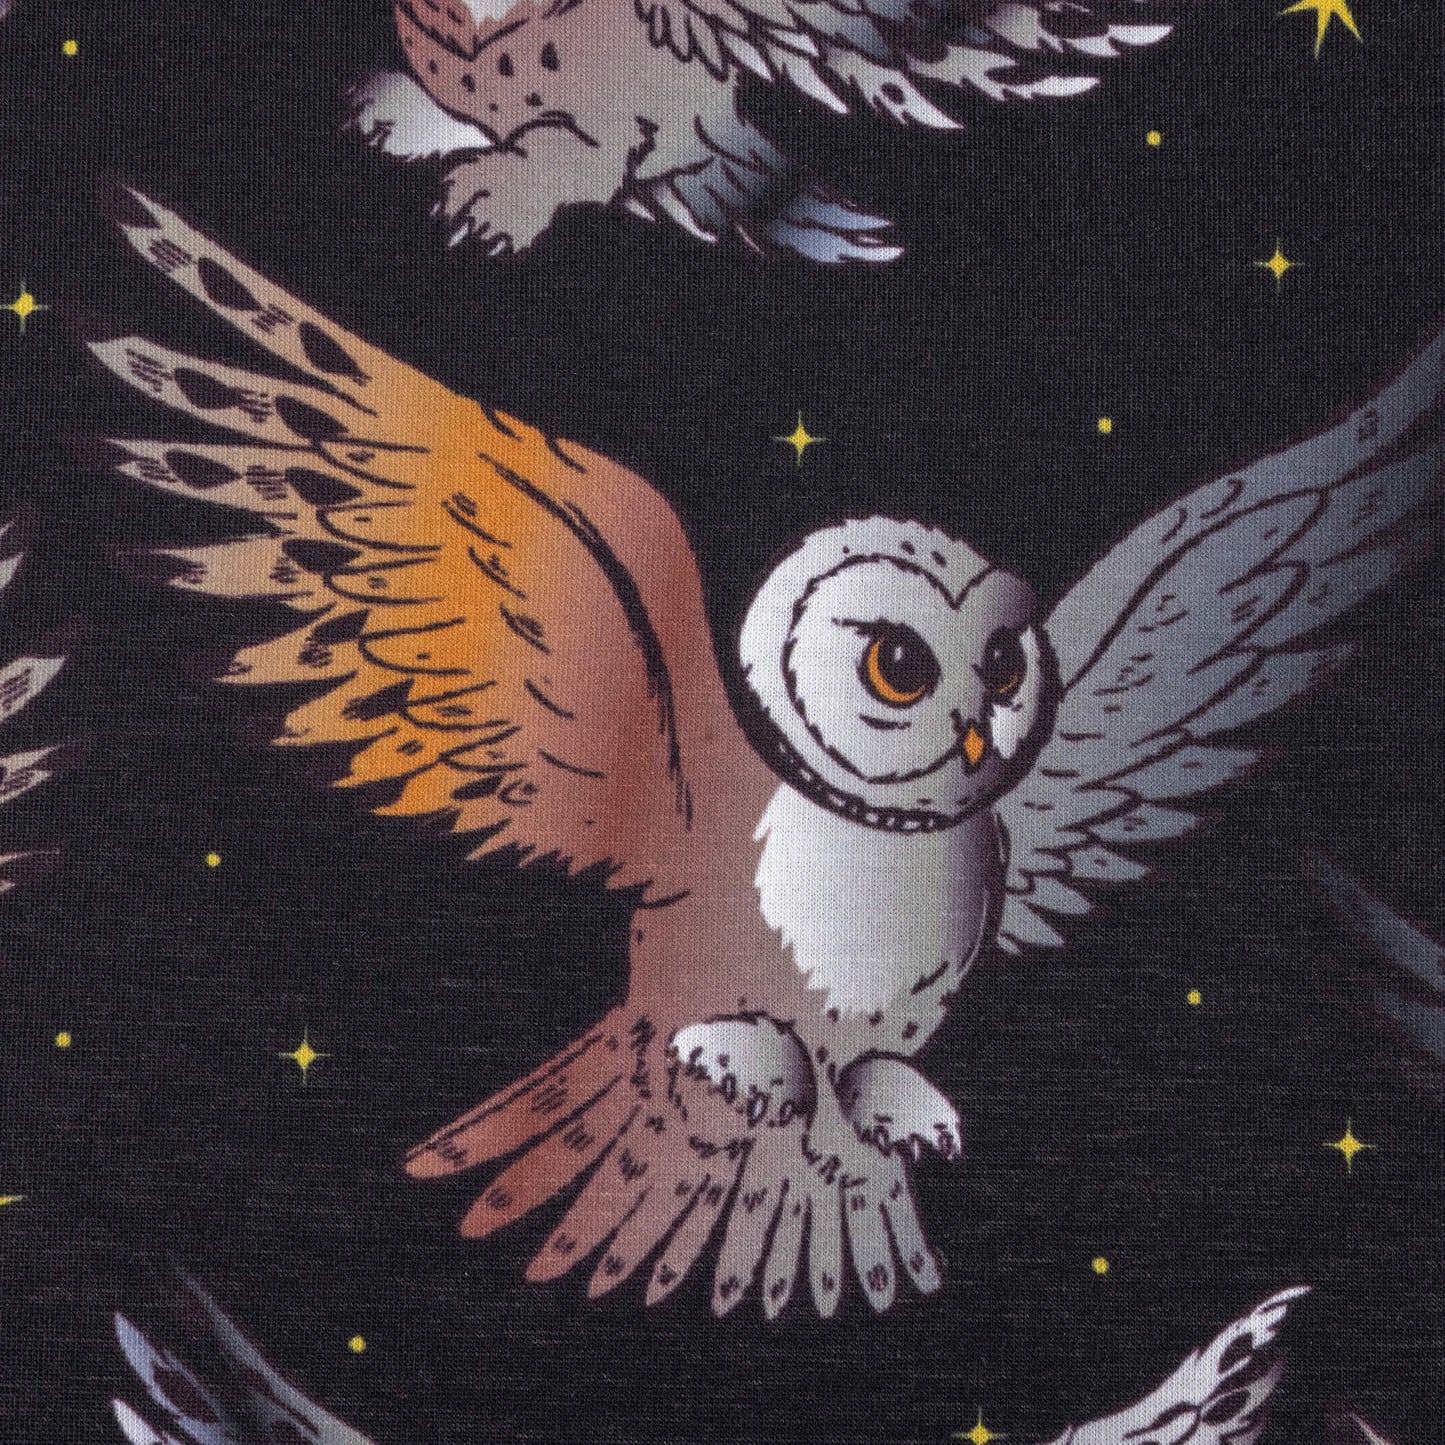 A close up look at the What a hoot stretch jersey fabric featuring barn owls in flight with black background and yellow twinkly stars